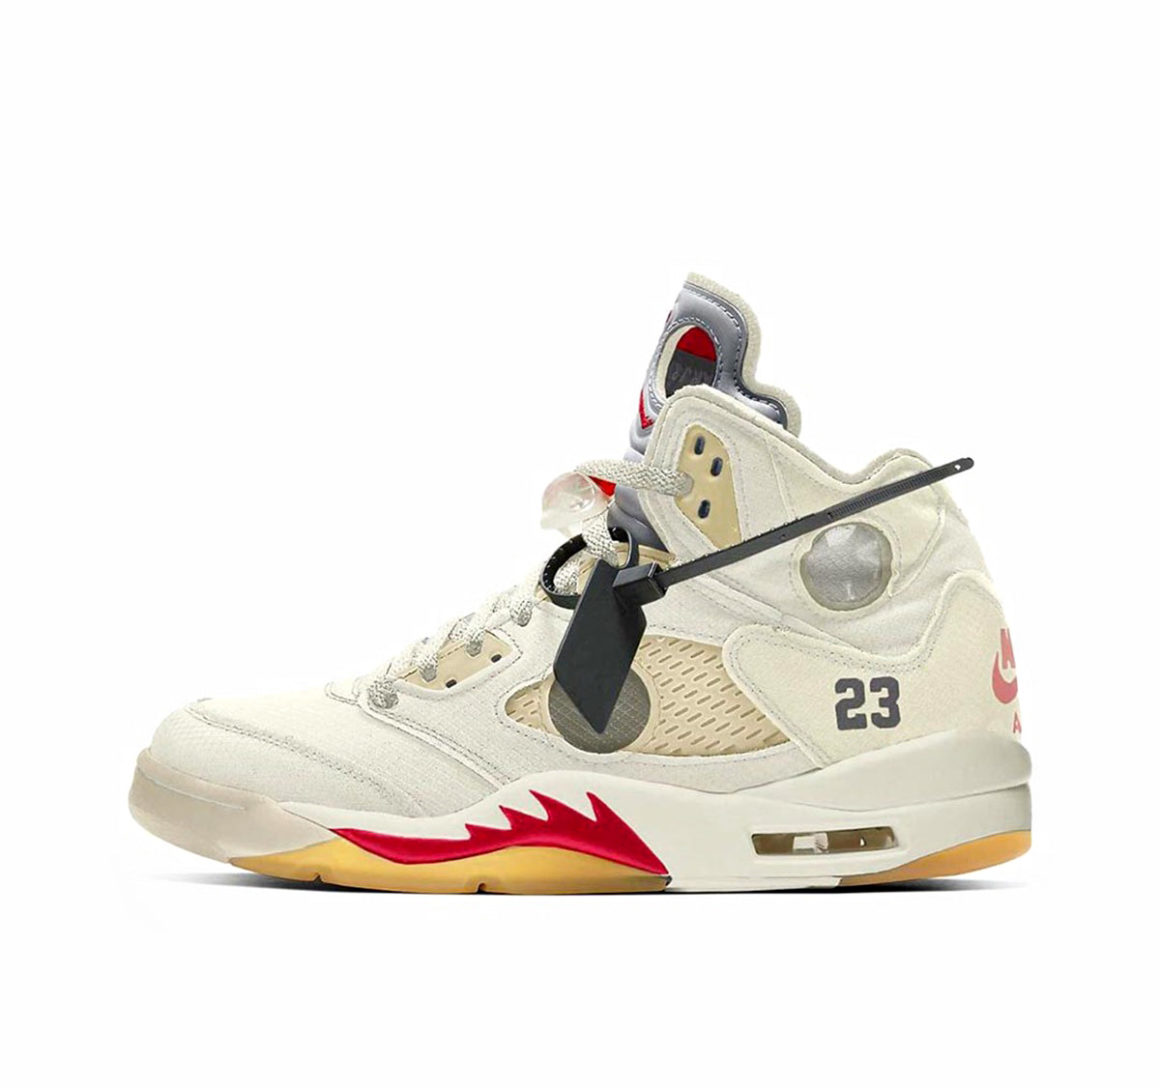 when does the off white jordan 5 release